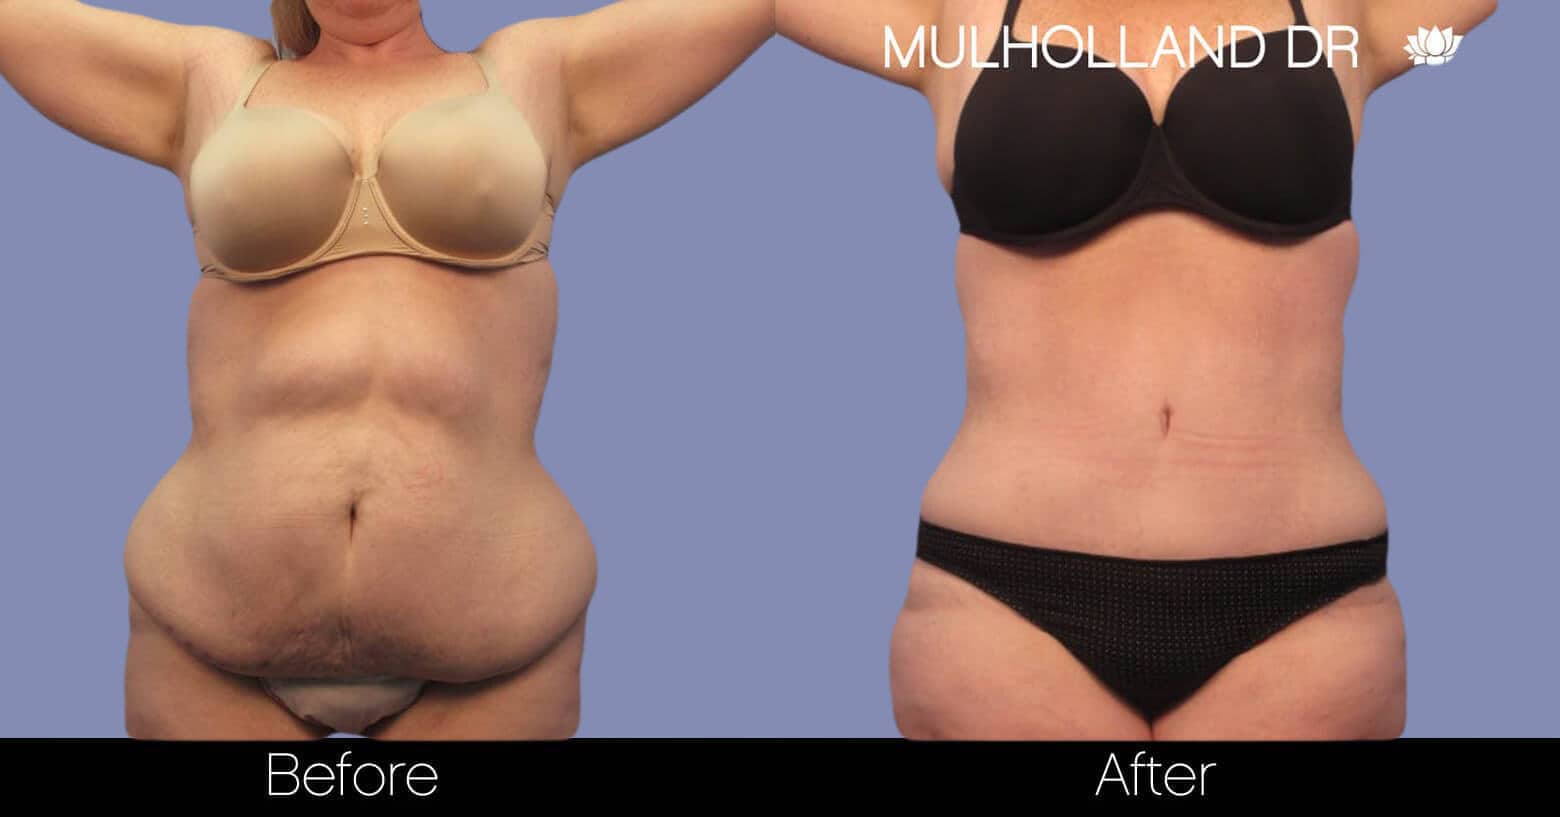 Learn The Secrets To Getting Your Best Tummy Tuck Result In Toronto